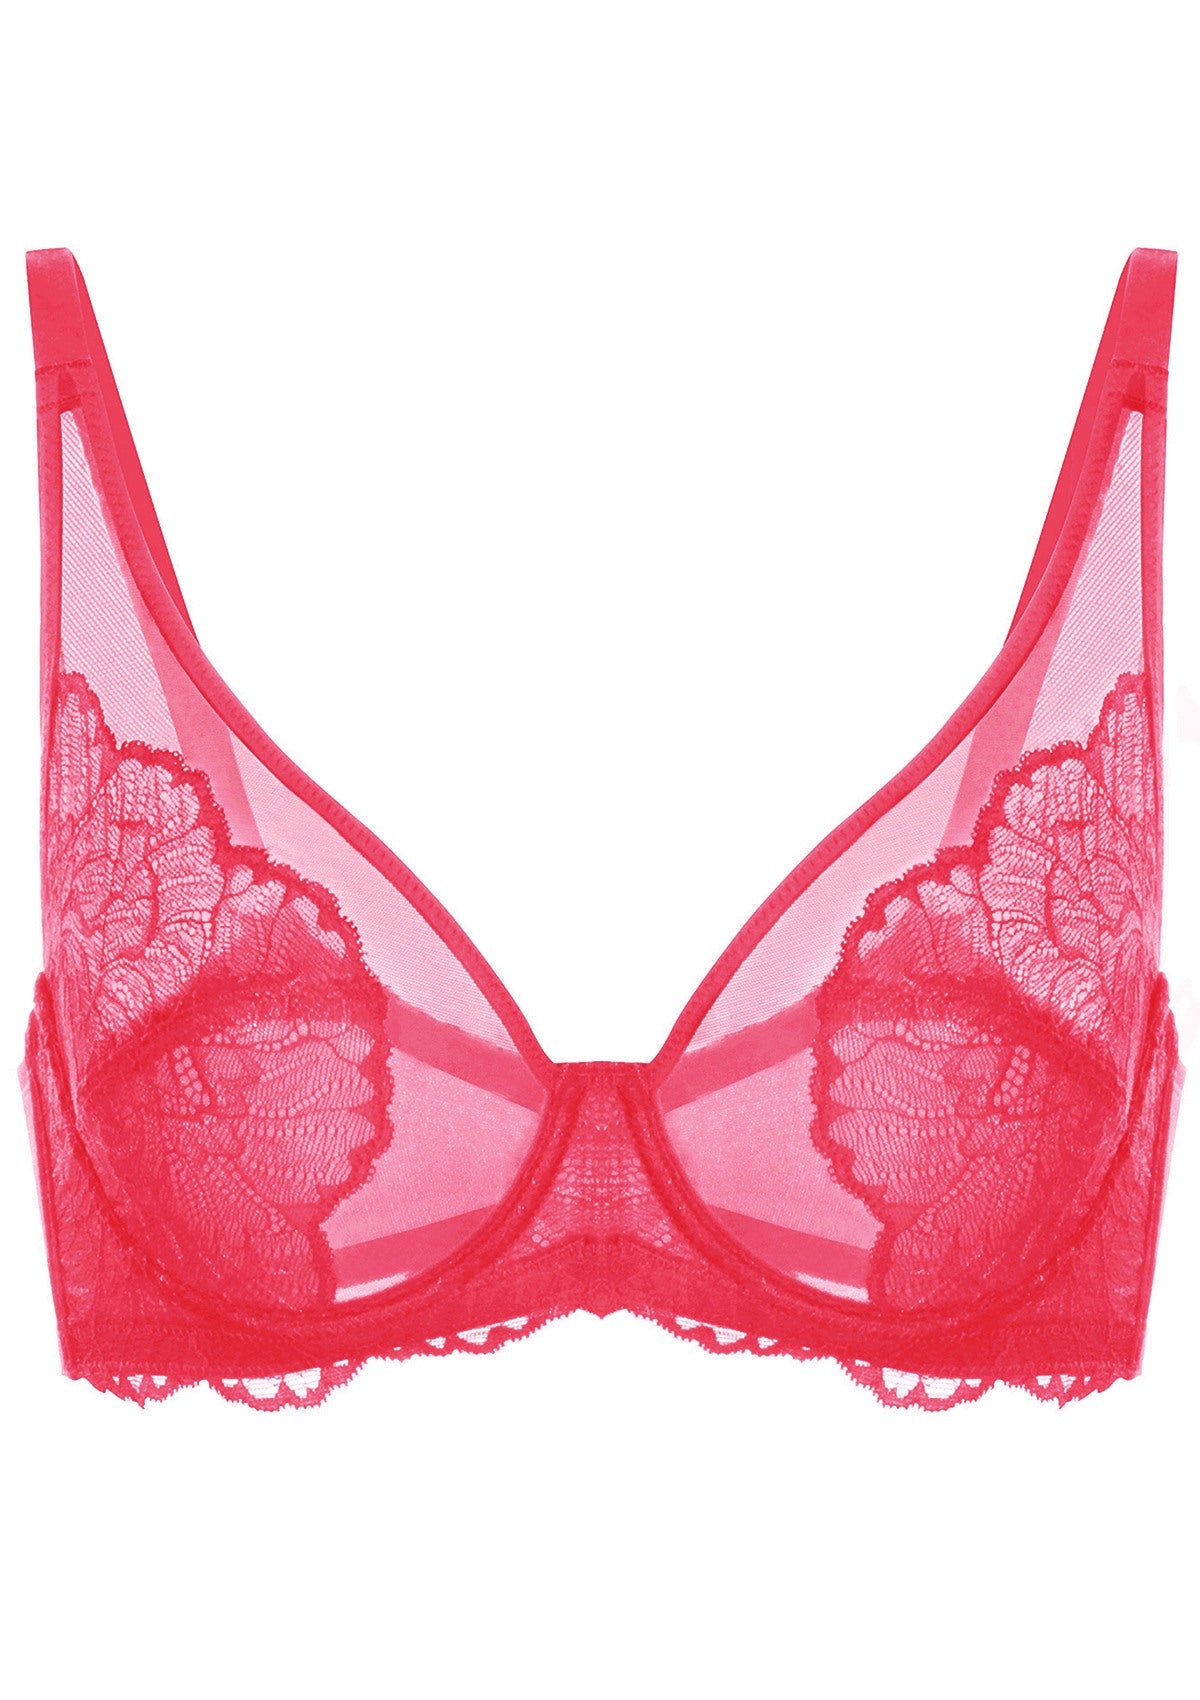 HSIA Blossom Unlined Lace Underwire Bra - Burgundy / 38 / C